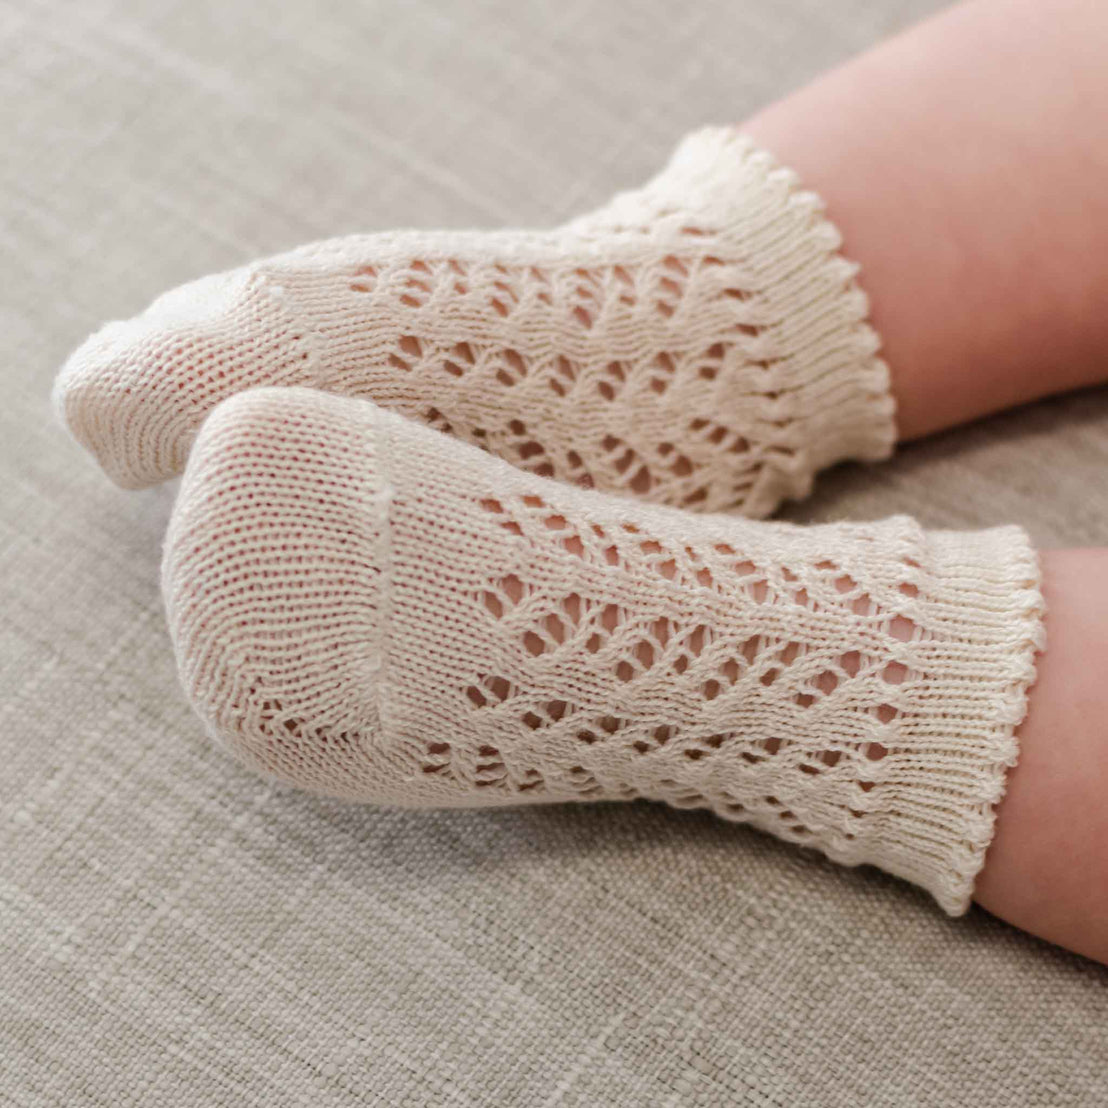 A close-up image of a baby's feet wearing delicate, cream-colored Crochet Socks with an openwork pattern, set against a soft, textured beige fabric background.